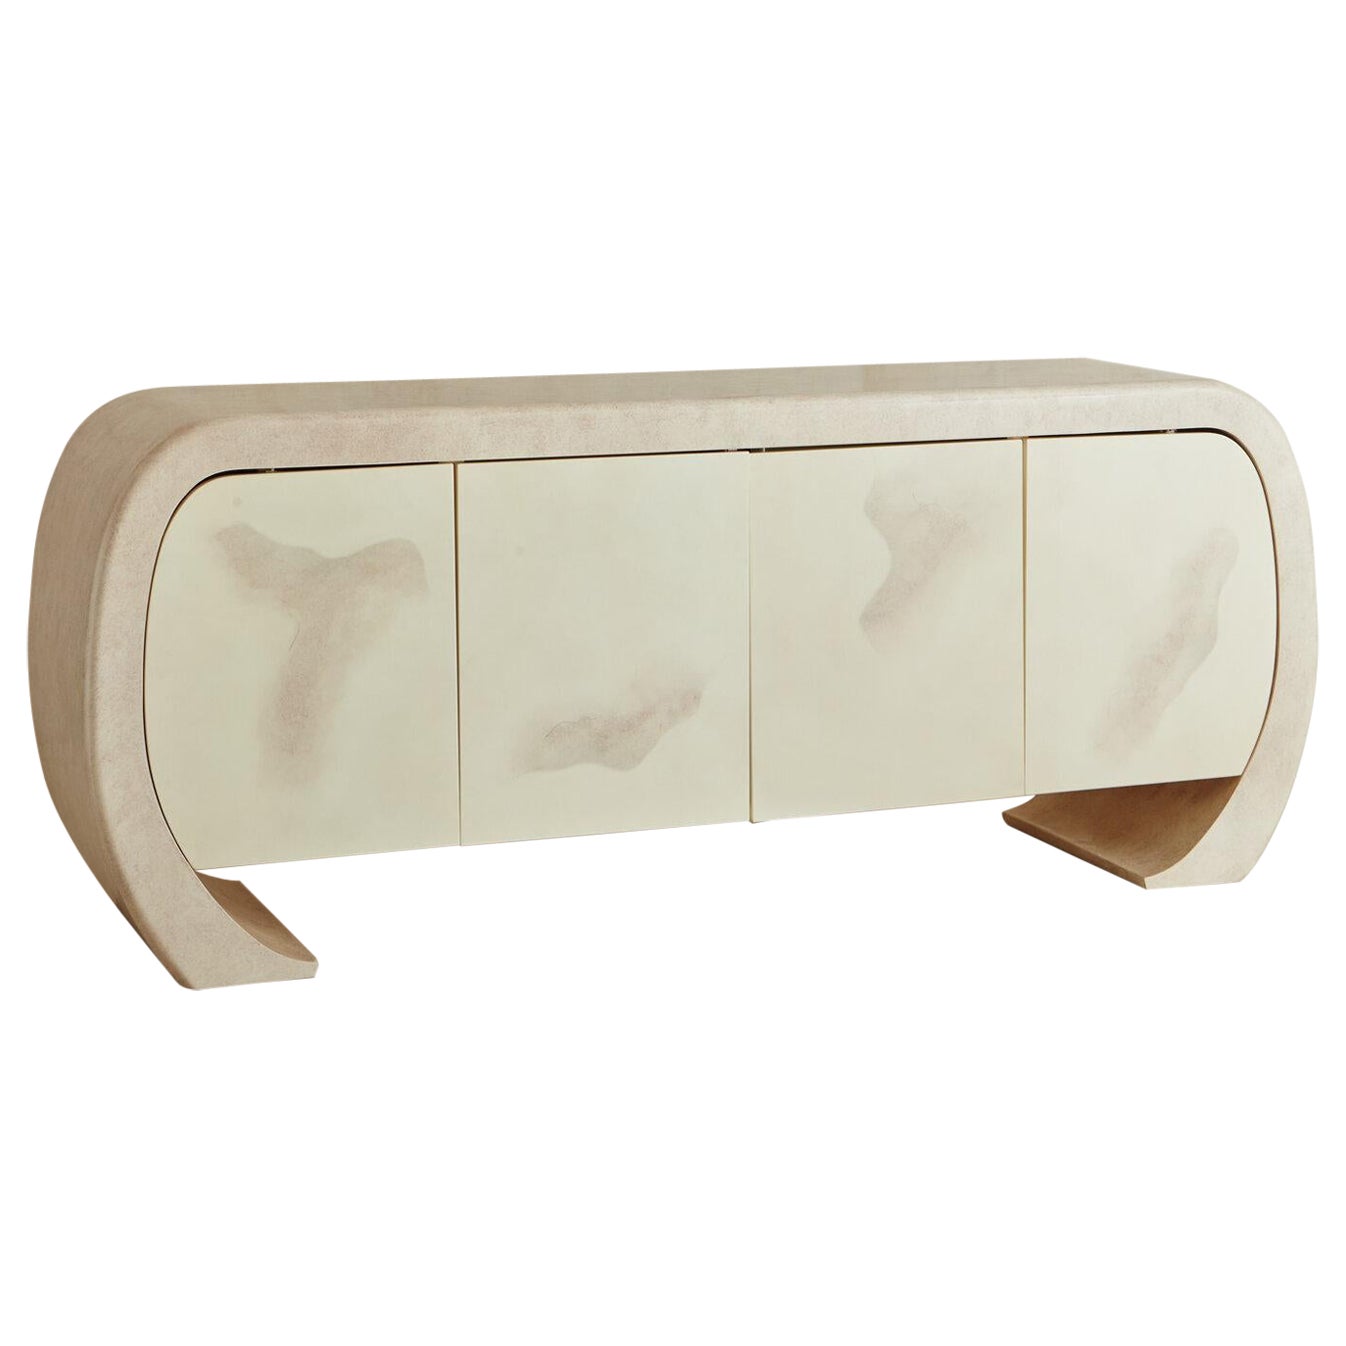 Post Modern Curved Credenza in Ivory Faux Parchment Finish, 1980s